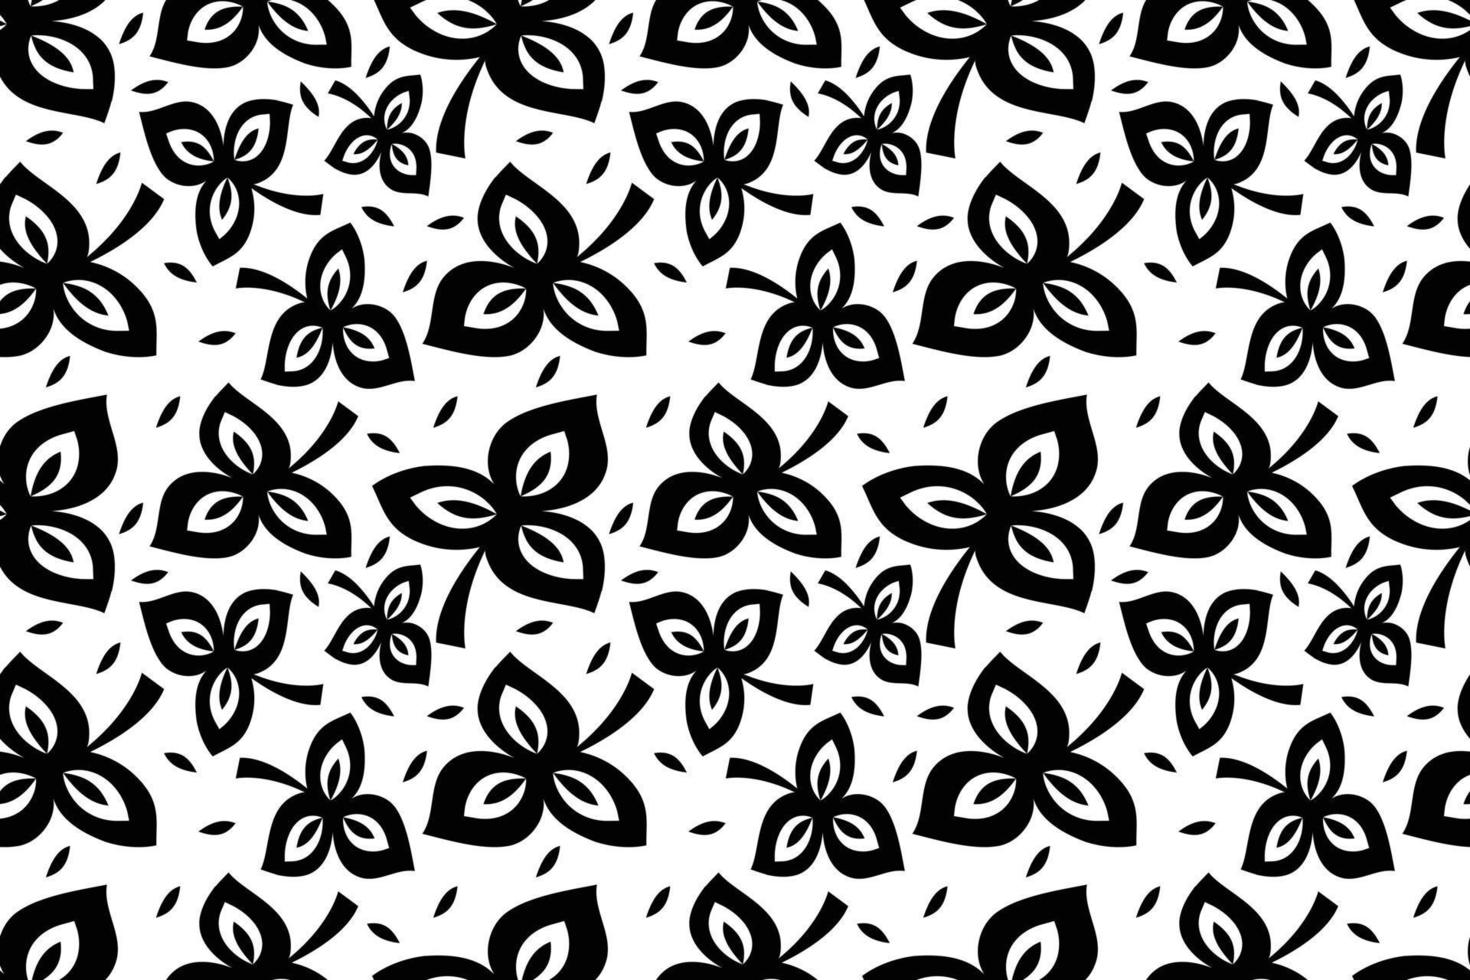 Abstract Leaves Pattern vector